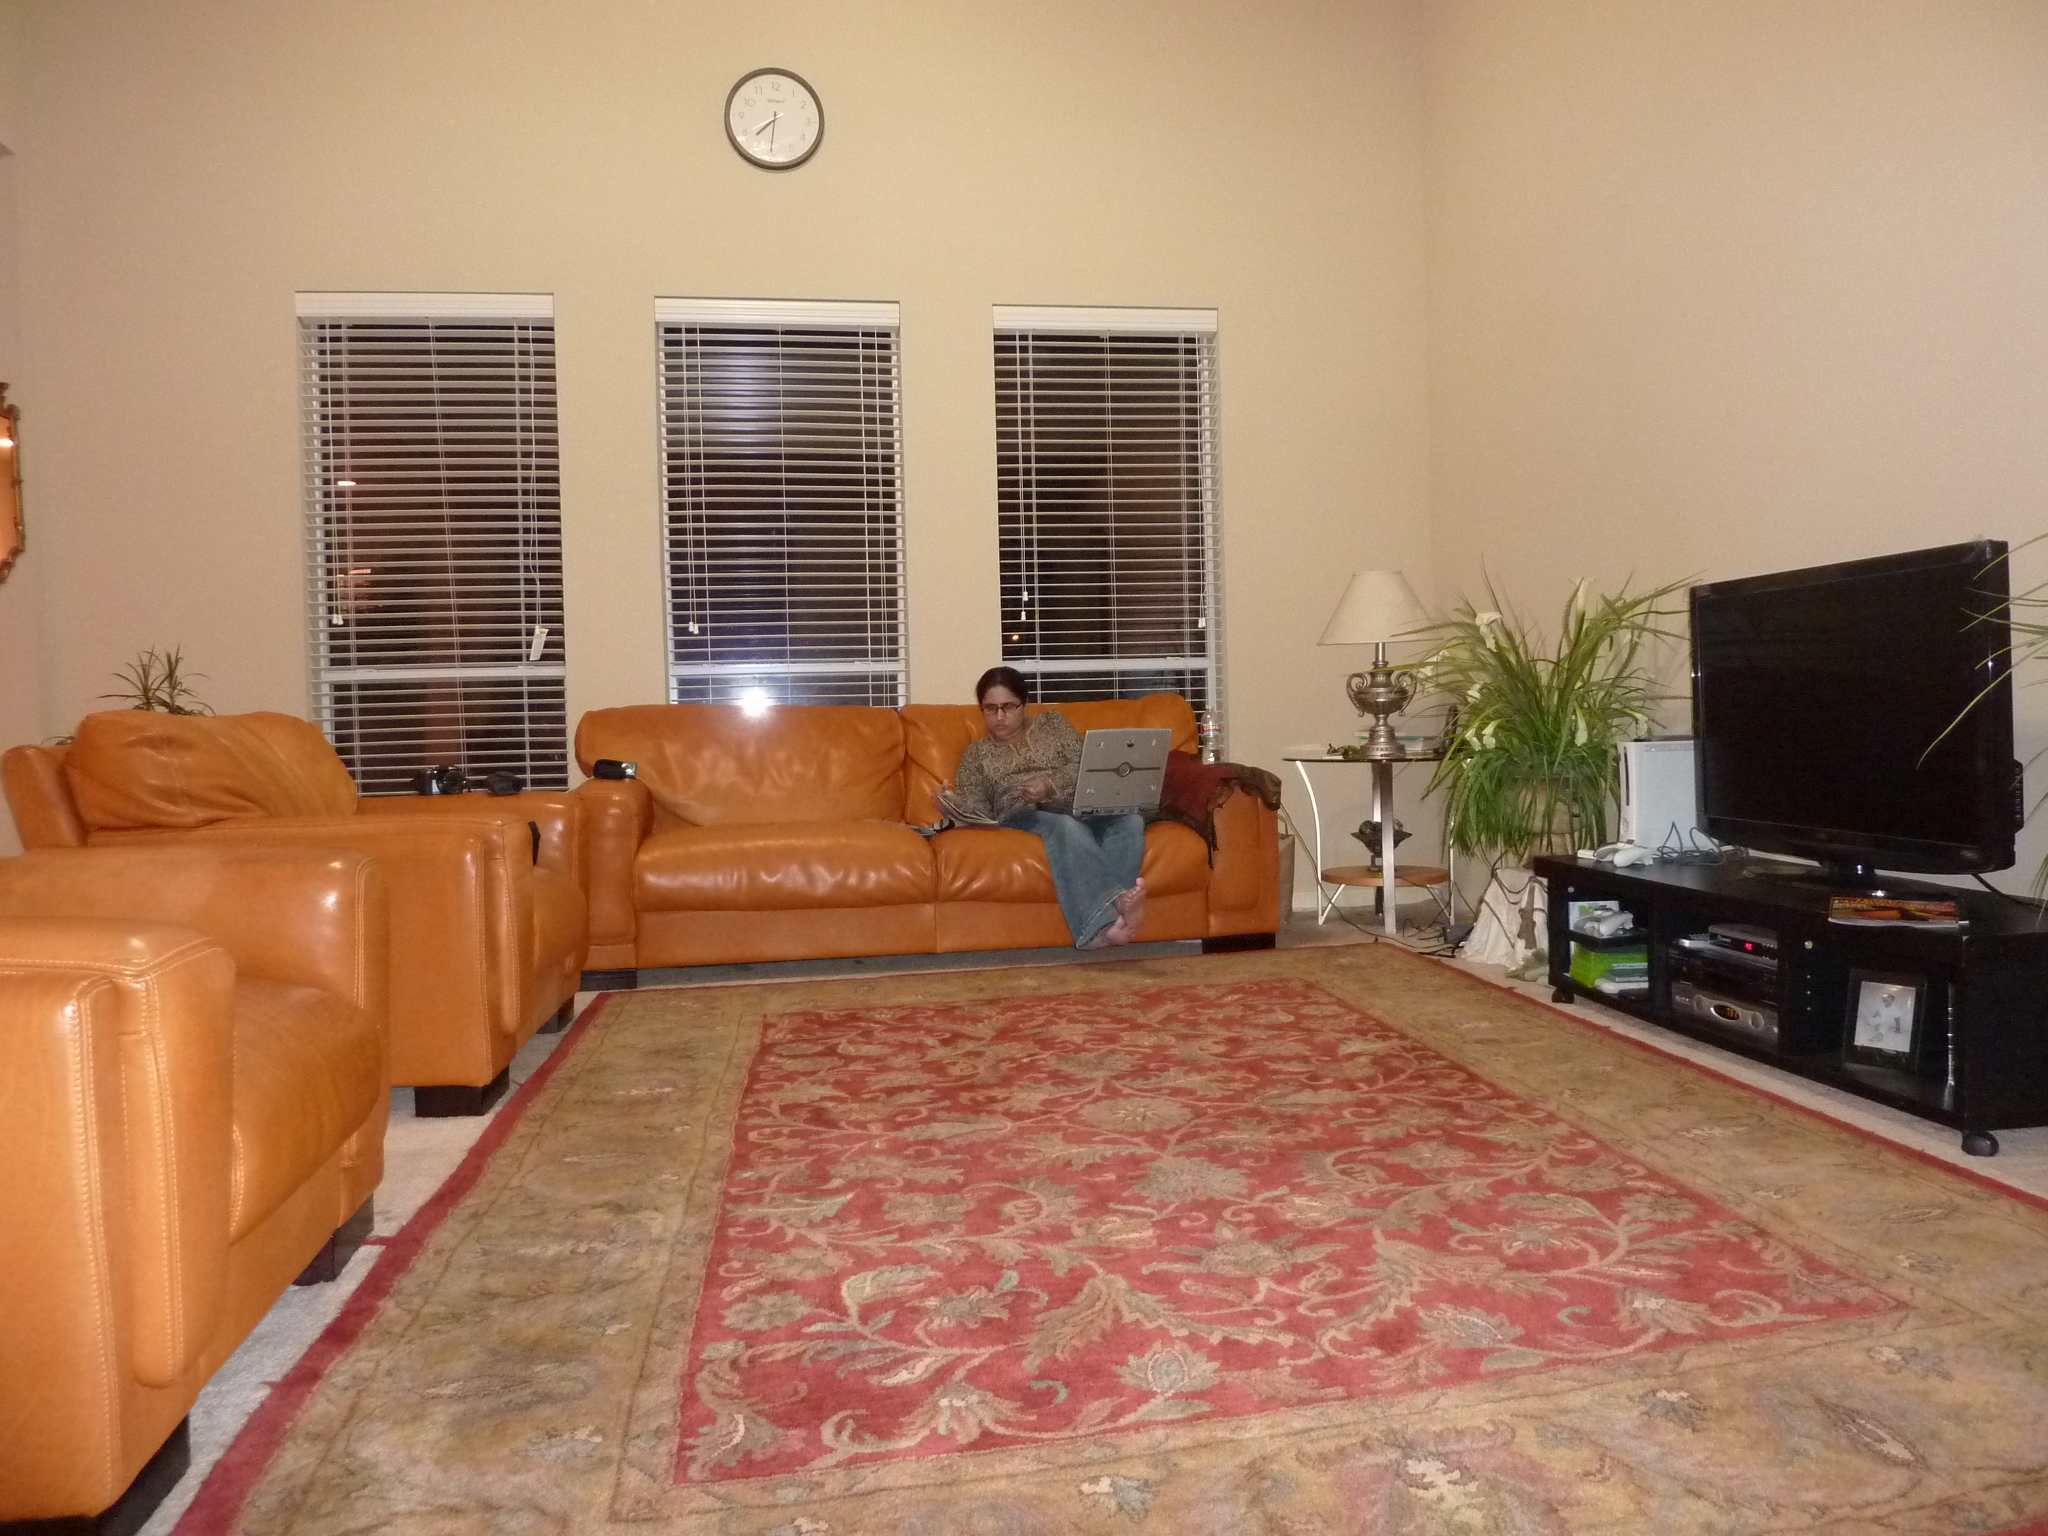 a living room has a rug and couches in it